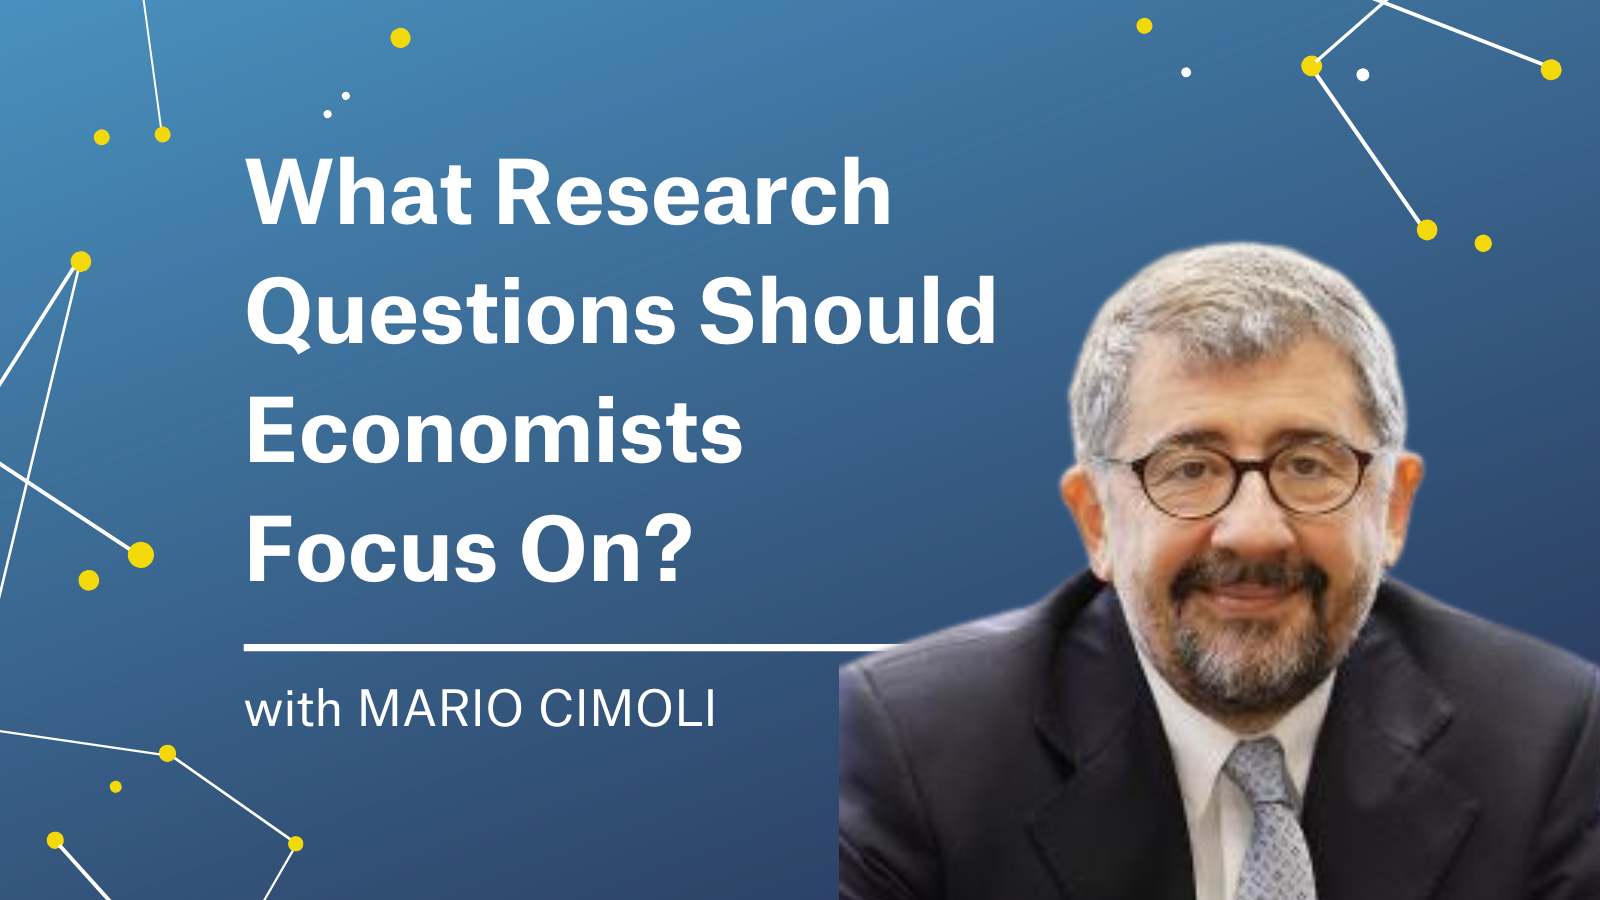 Mario Cimoli | The Most Pertinent Questions for Economists to Answer